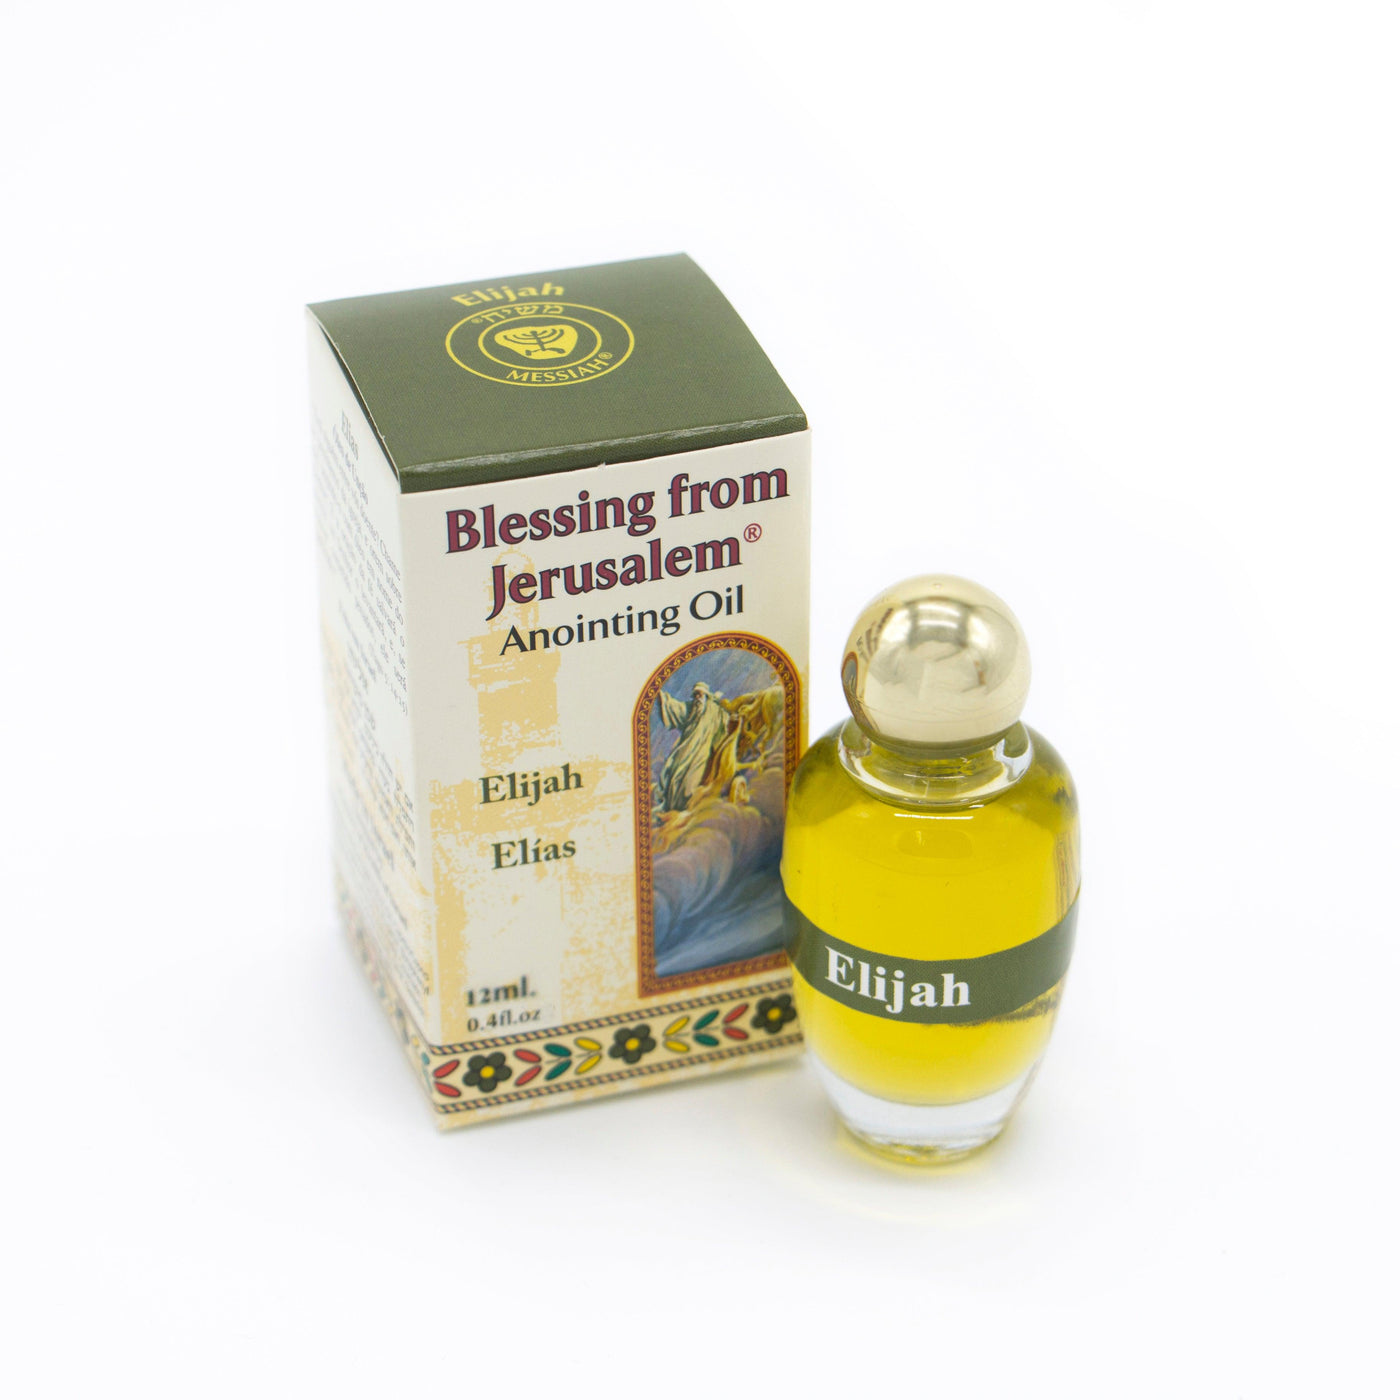 35x Anointing Oil 12ml - 0.4oz From Holyland Jerusalem - Spring Nahal